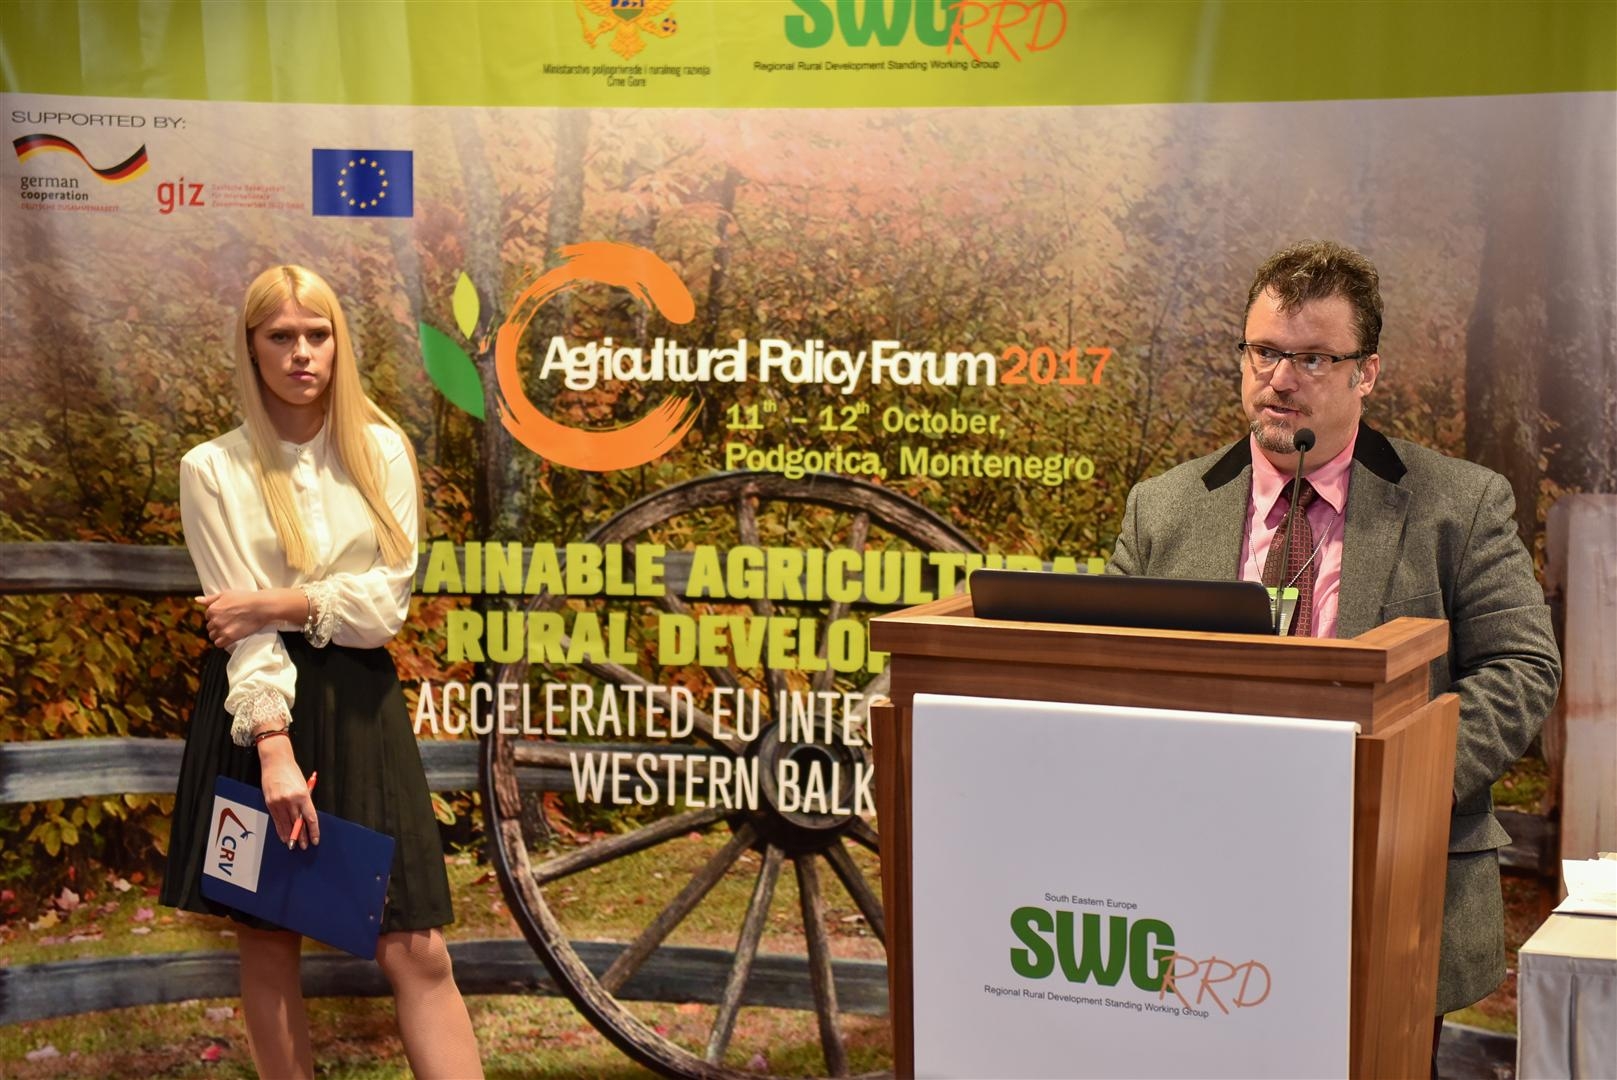 The president of INCA at the Agriculture Policy Forum 2017